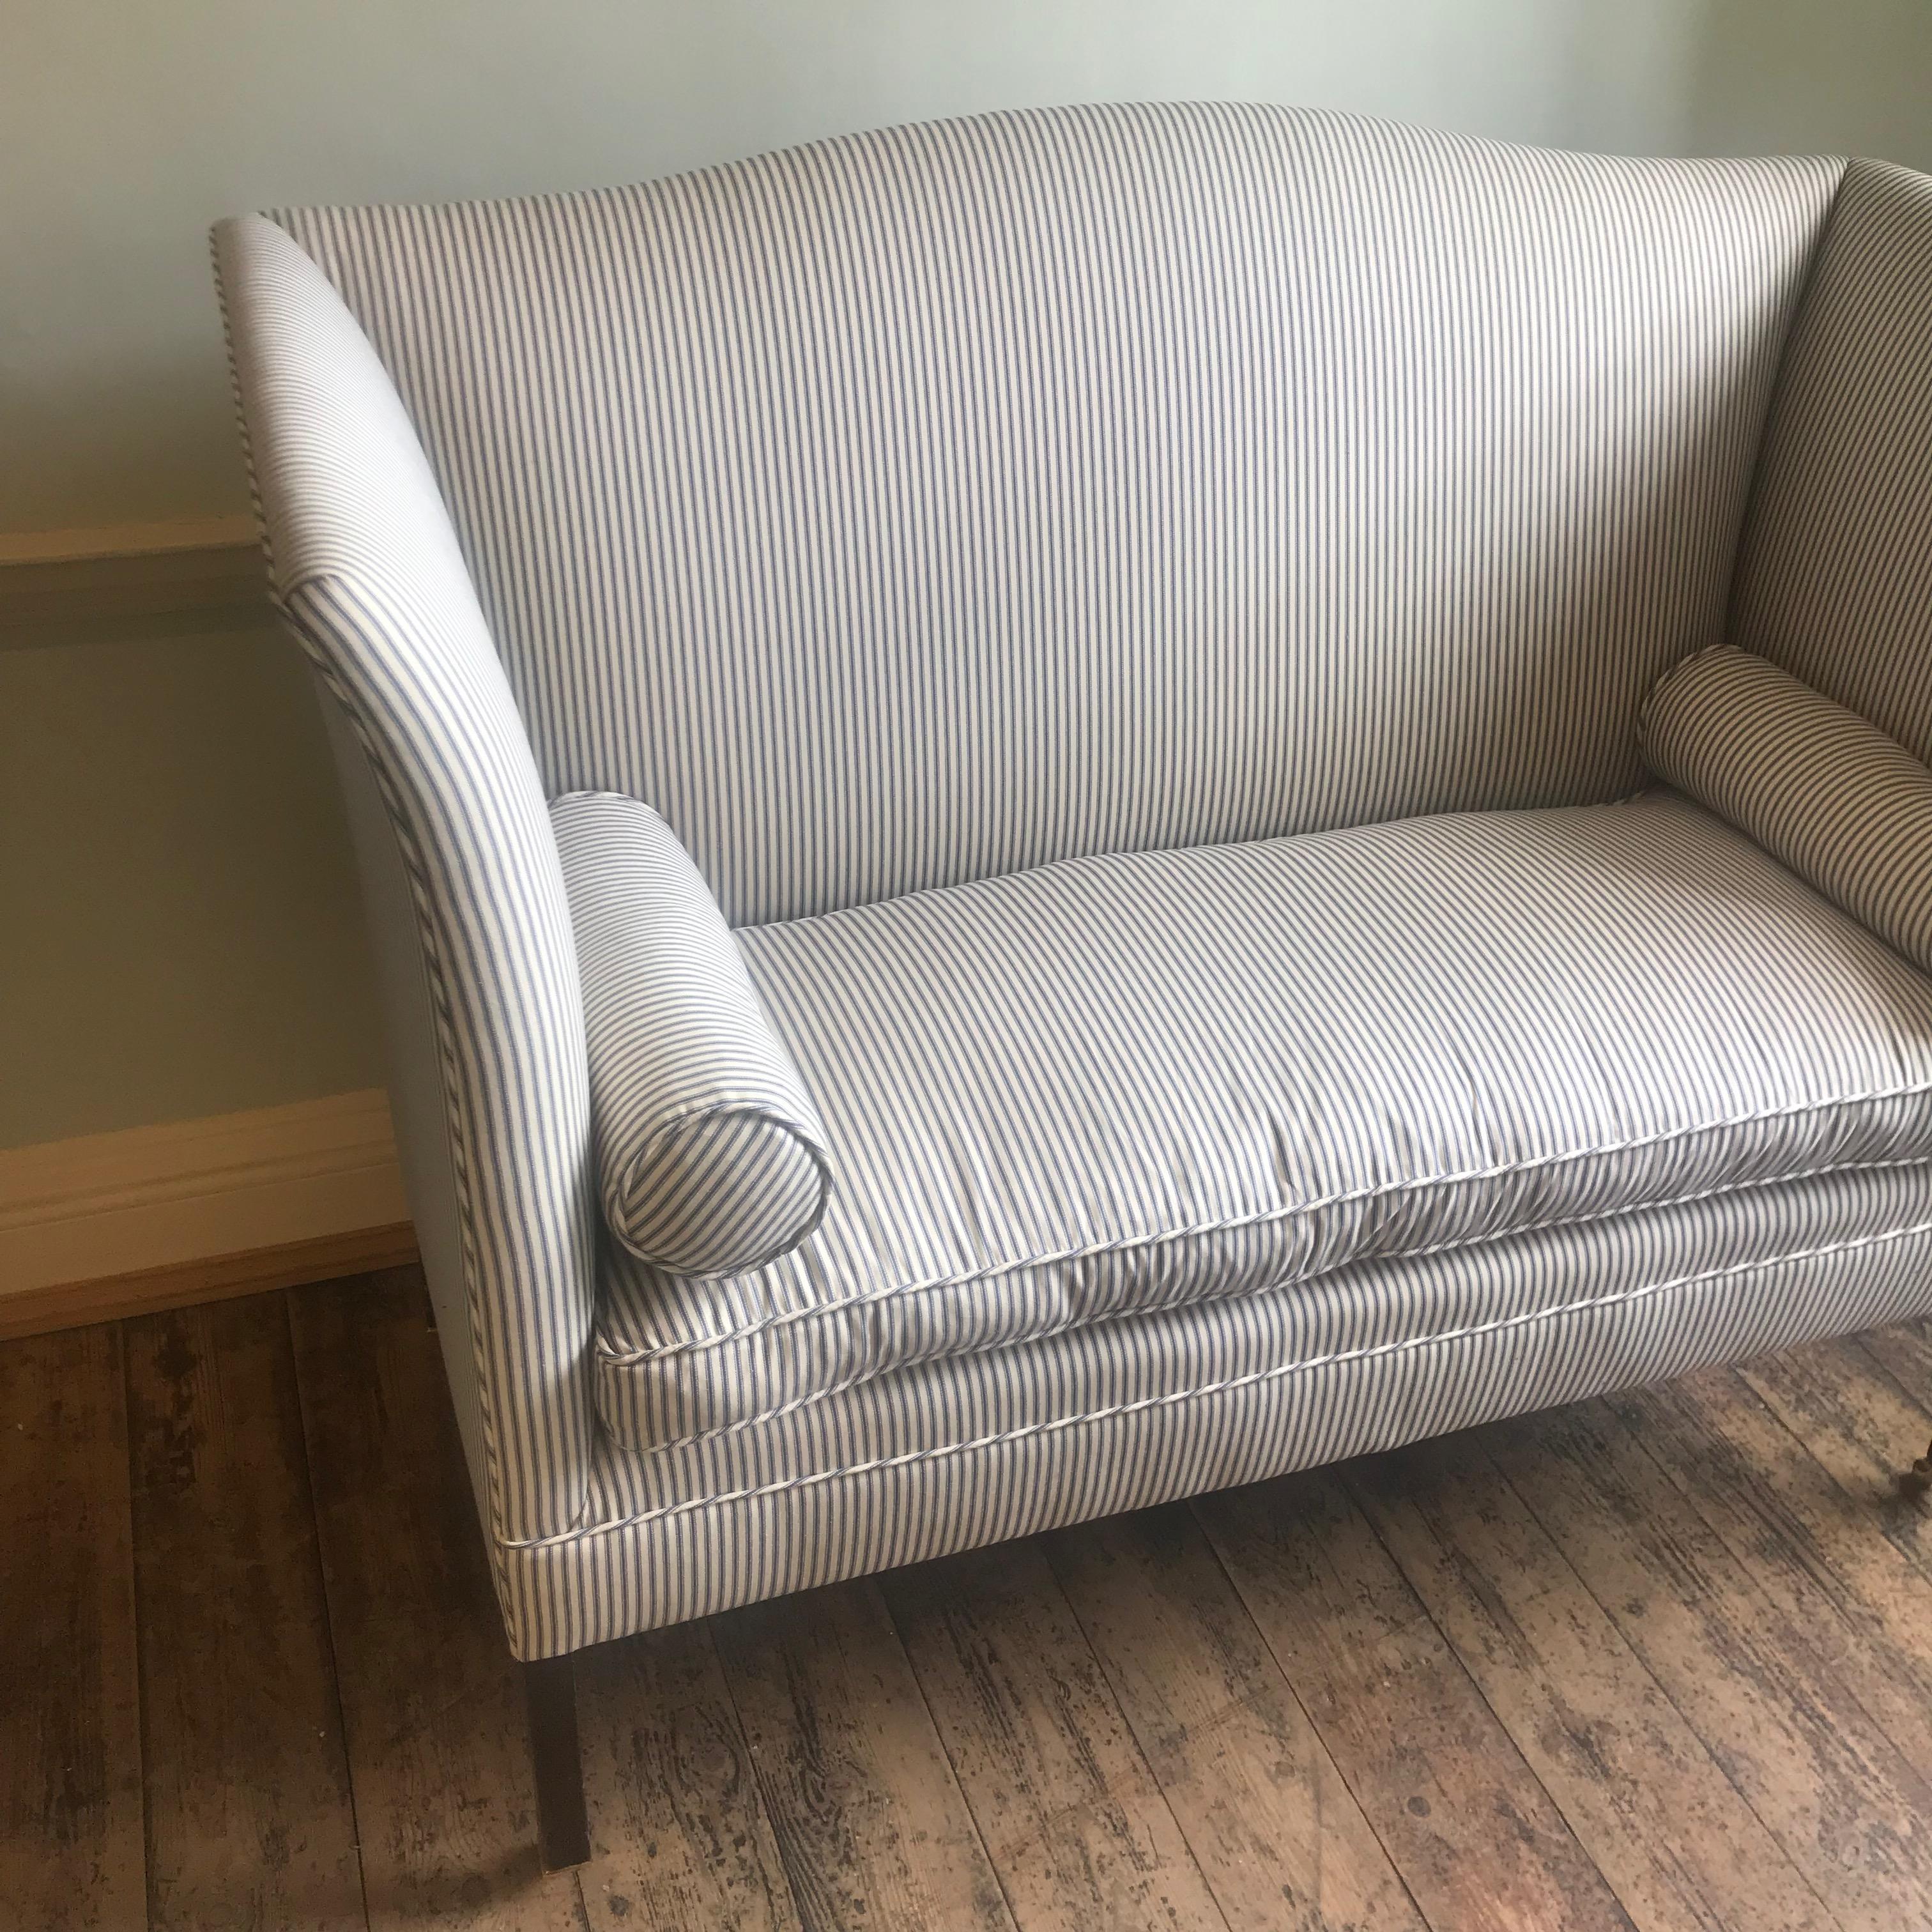 British Edwardian Period Wingback Sofa Newly Upholstered in Striped Ticking For Sale